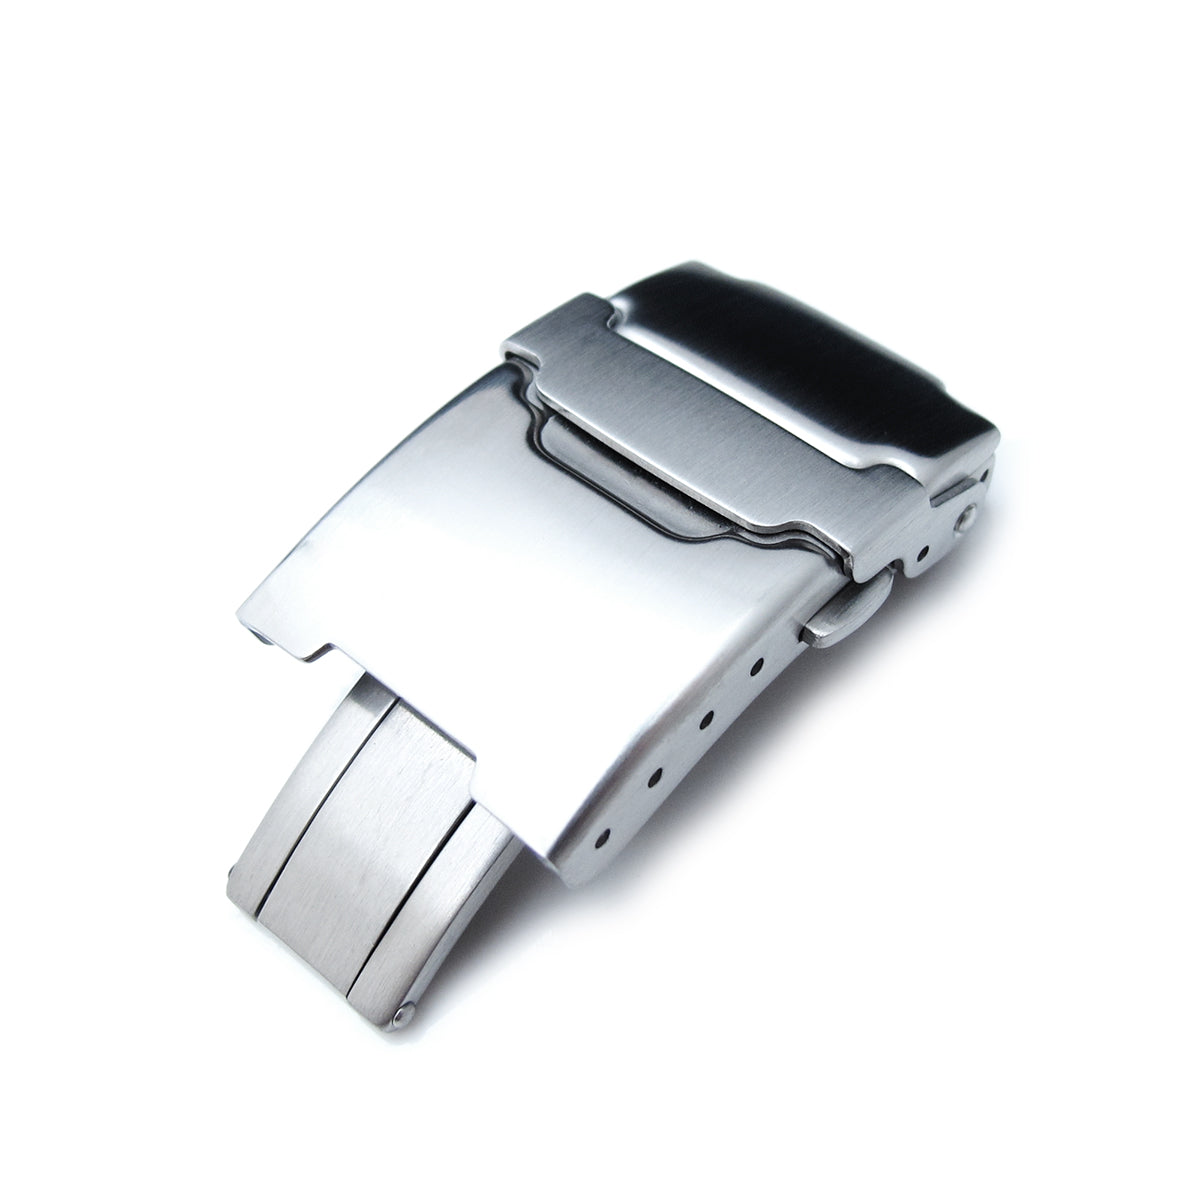 20mm Brushed Stainless Steel Push Button Diver Clasp for Watch Band 4 adjust holes and improved Flip-Lock Strapcode Buckles